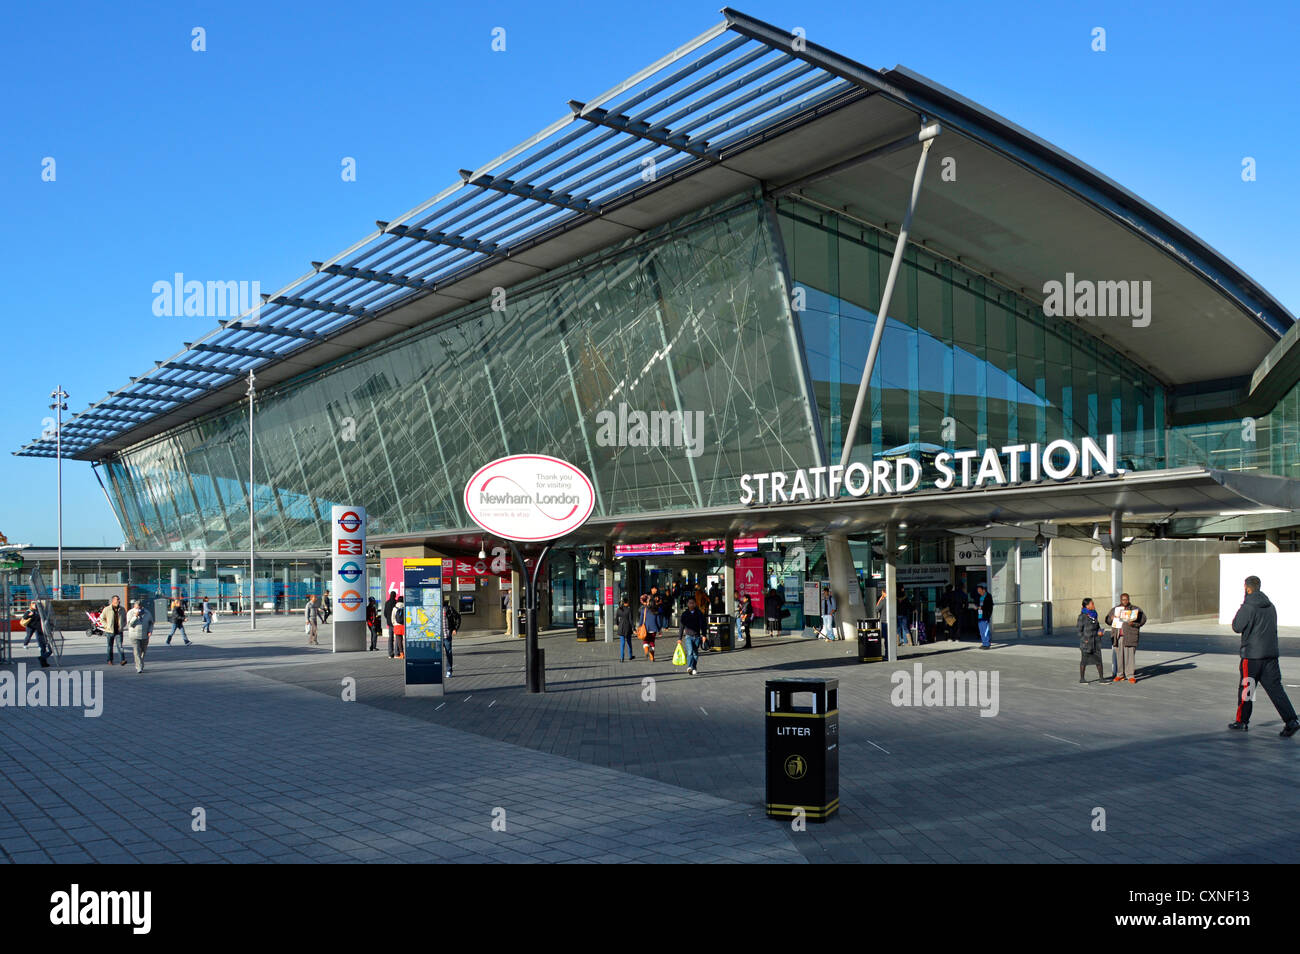 Stratford London modern train station facade which was the main public transport hub for the 2012 London Olympic Games Newham East London England UK Stock Photo